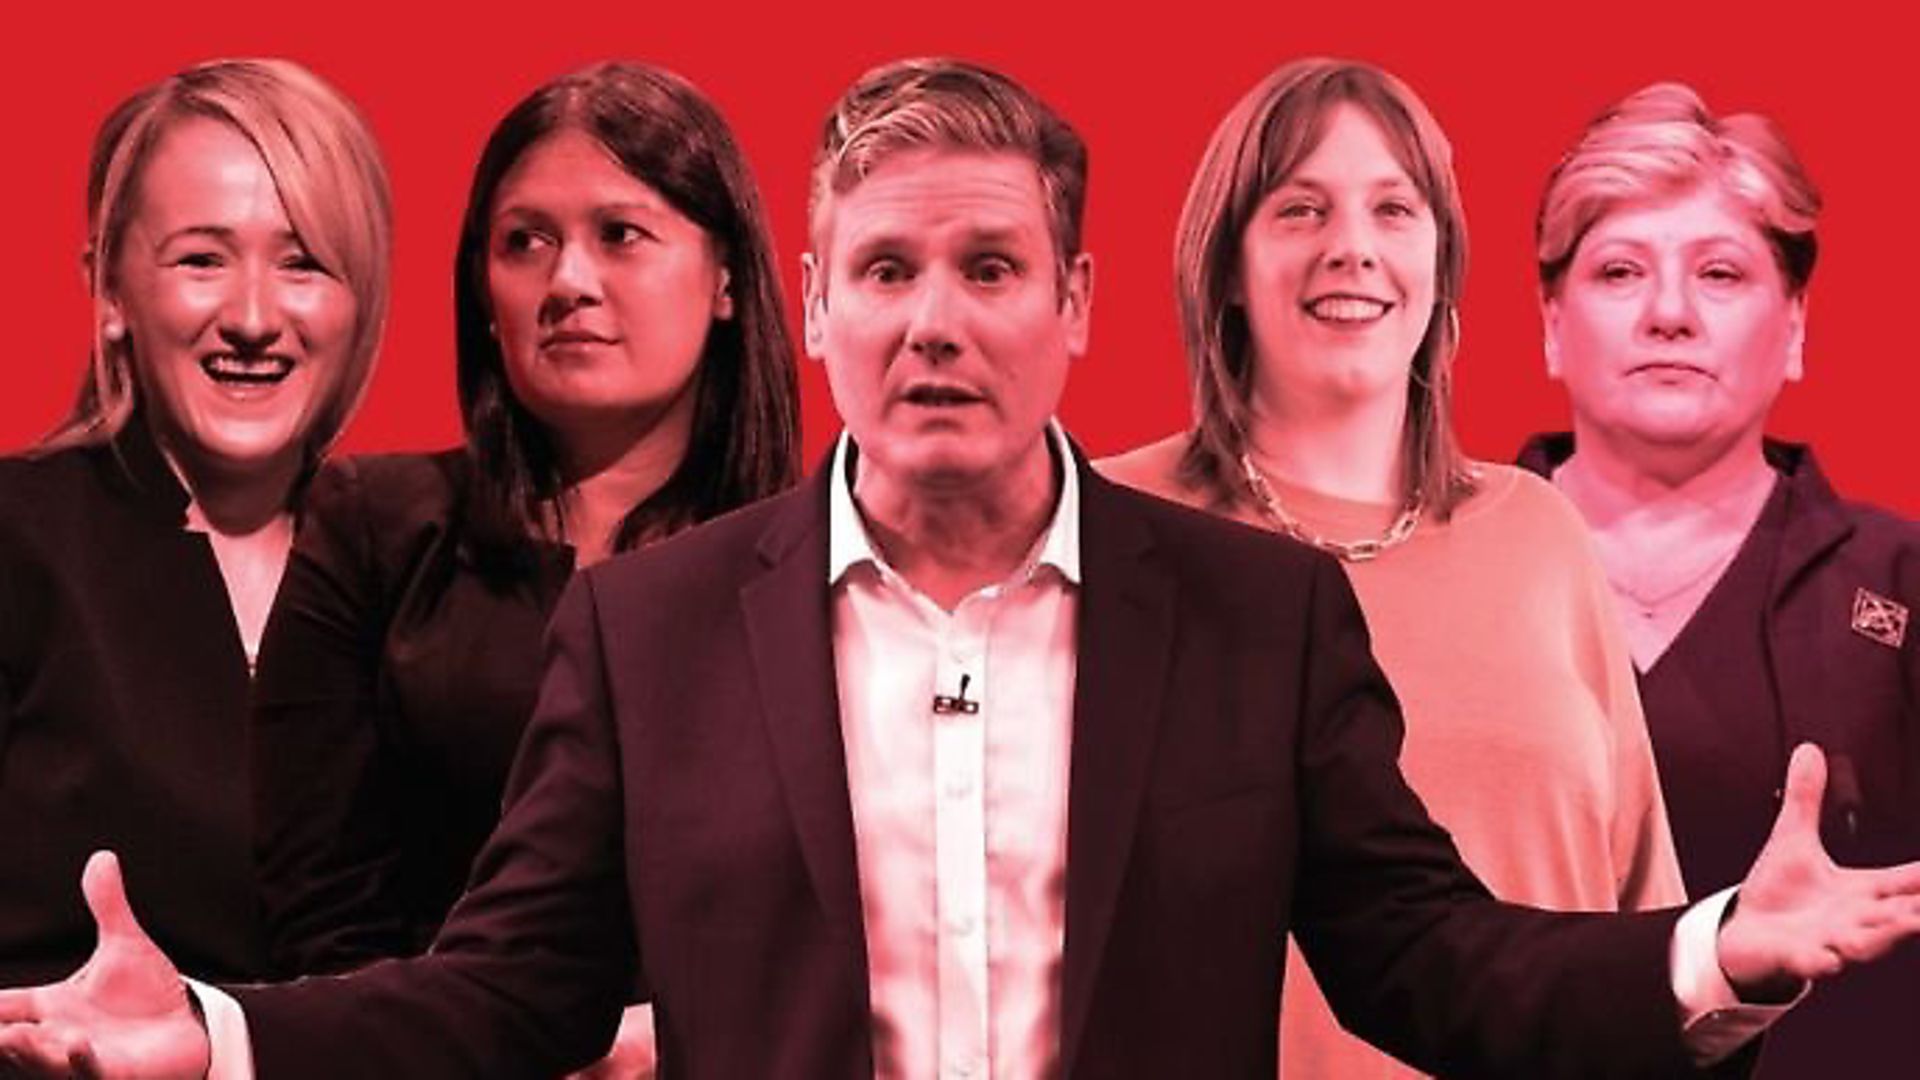 Rebecca Long-Bailey, Lisa Nandy, Keir Starmer, Jess Phillips and Emily Thornberry. Photograph: Getty/TNE. - Credit: Archant